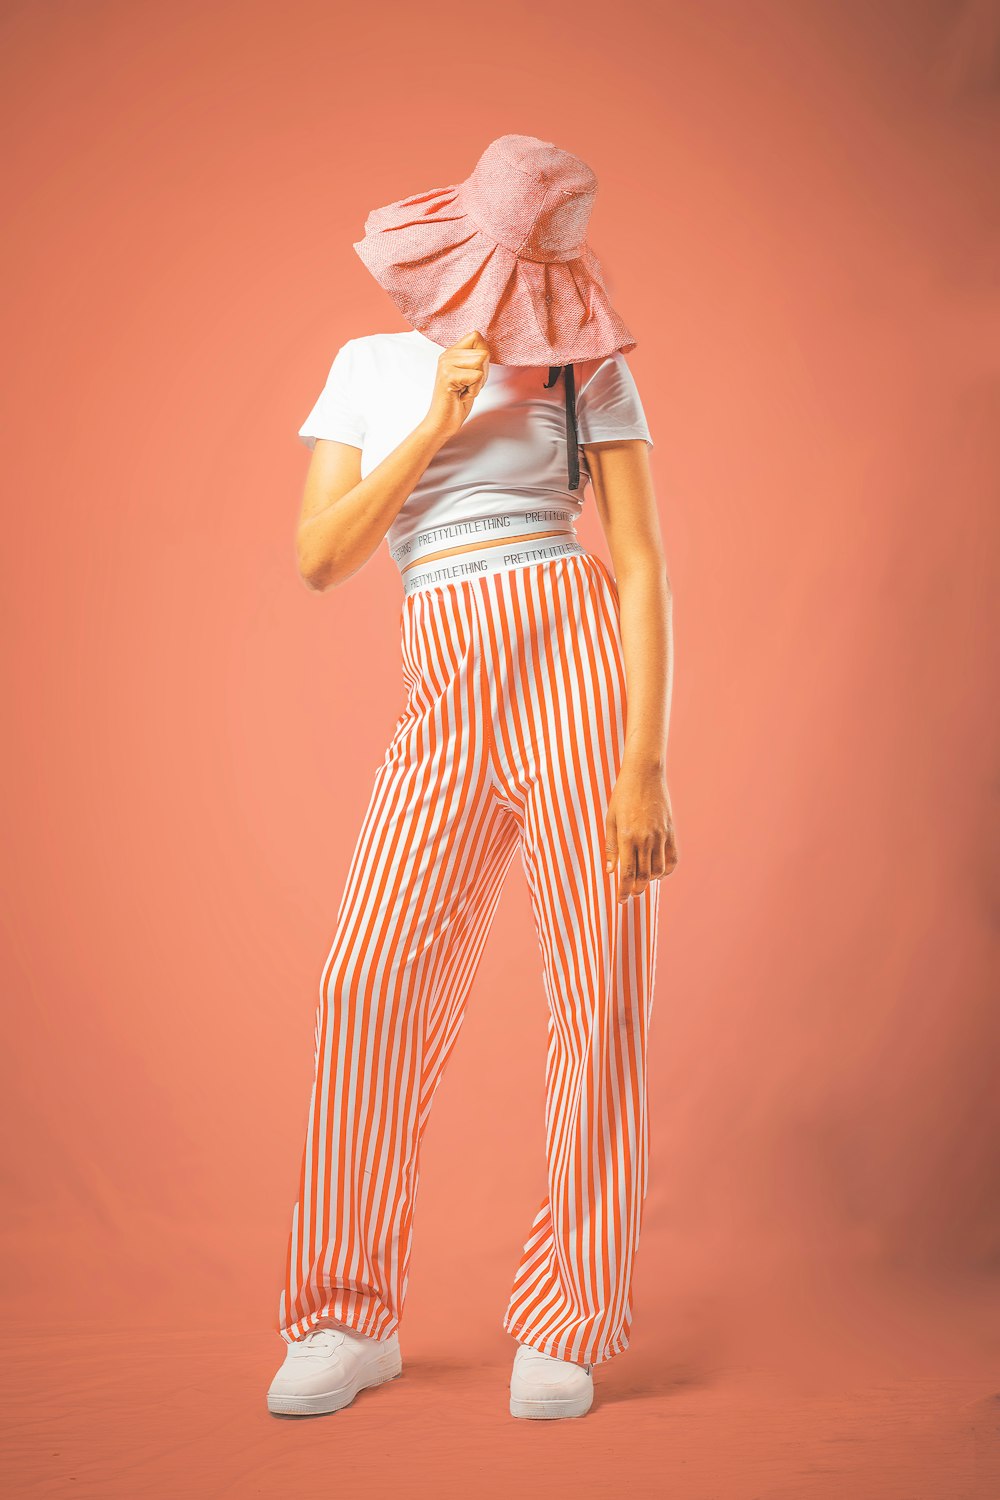 a woman in striped pants and a pink hat